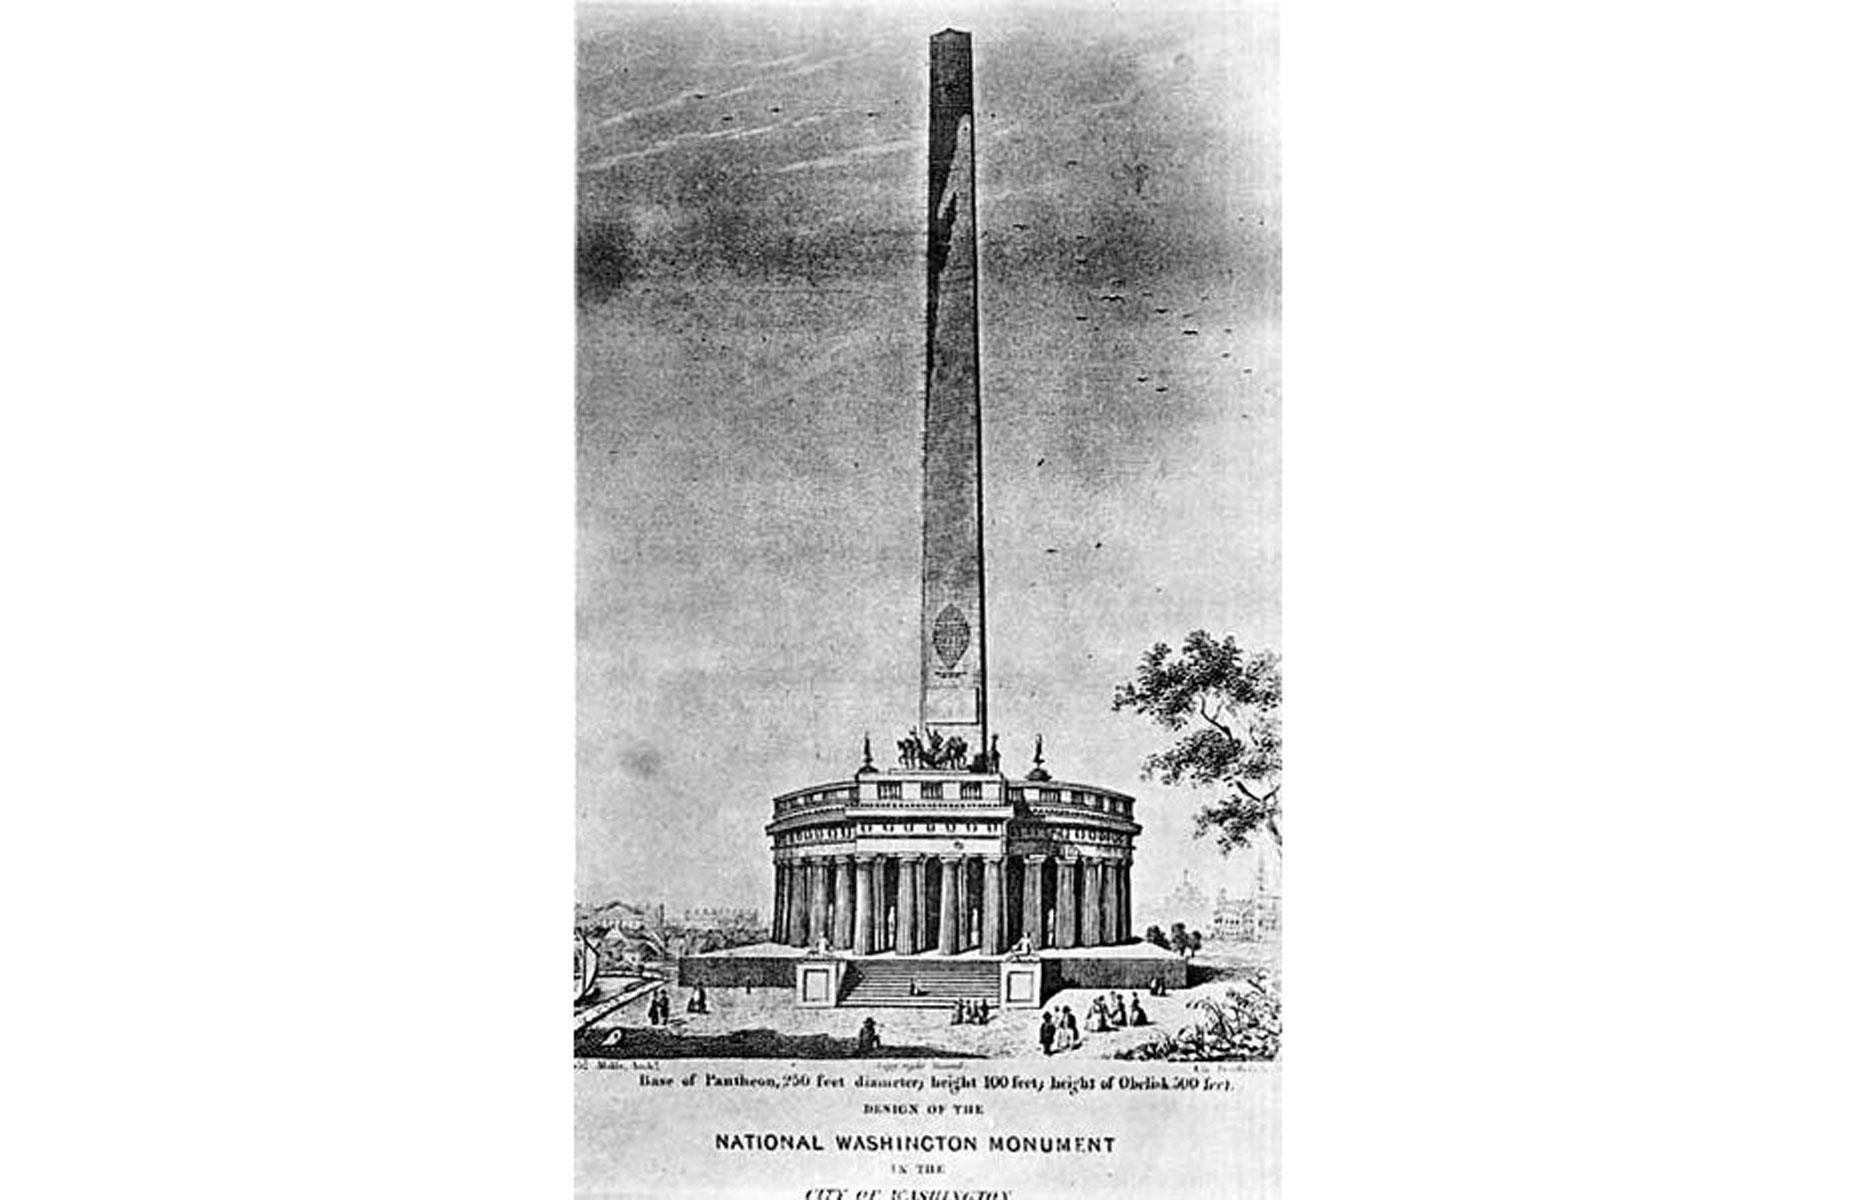 Mills envisaged a Neoclassical columned temple at the base of the obelisk, topped by an ostentatious statue of George Washington in a chariot. The society in charge of erecting the monument balked at the price tag and in the end chose to build just the obelisk.